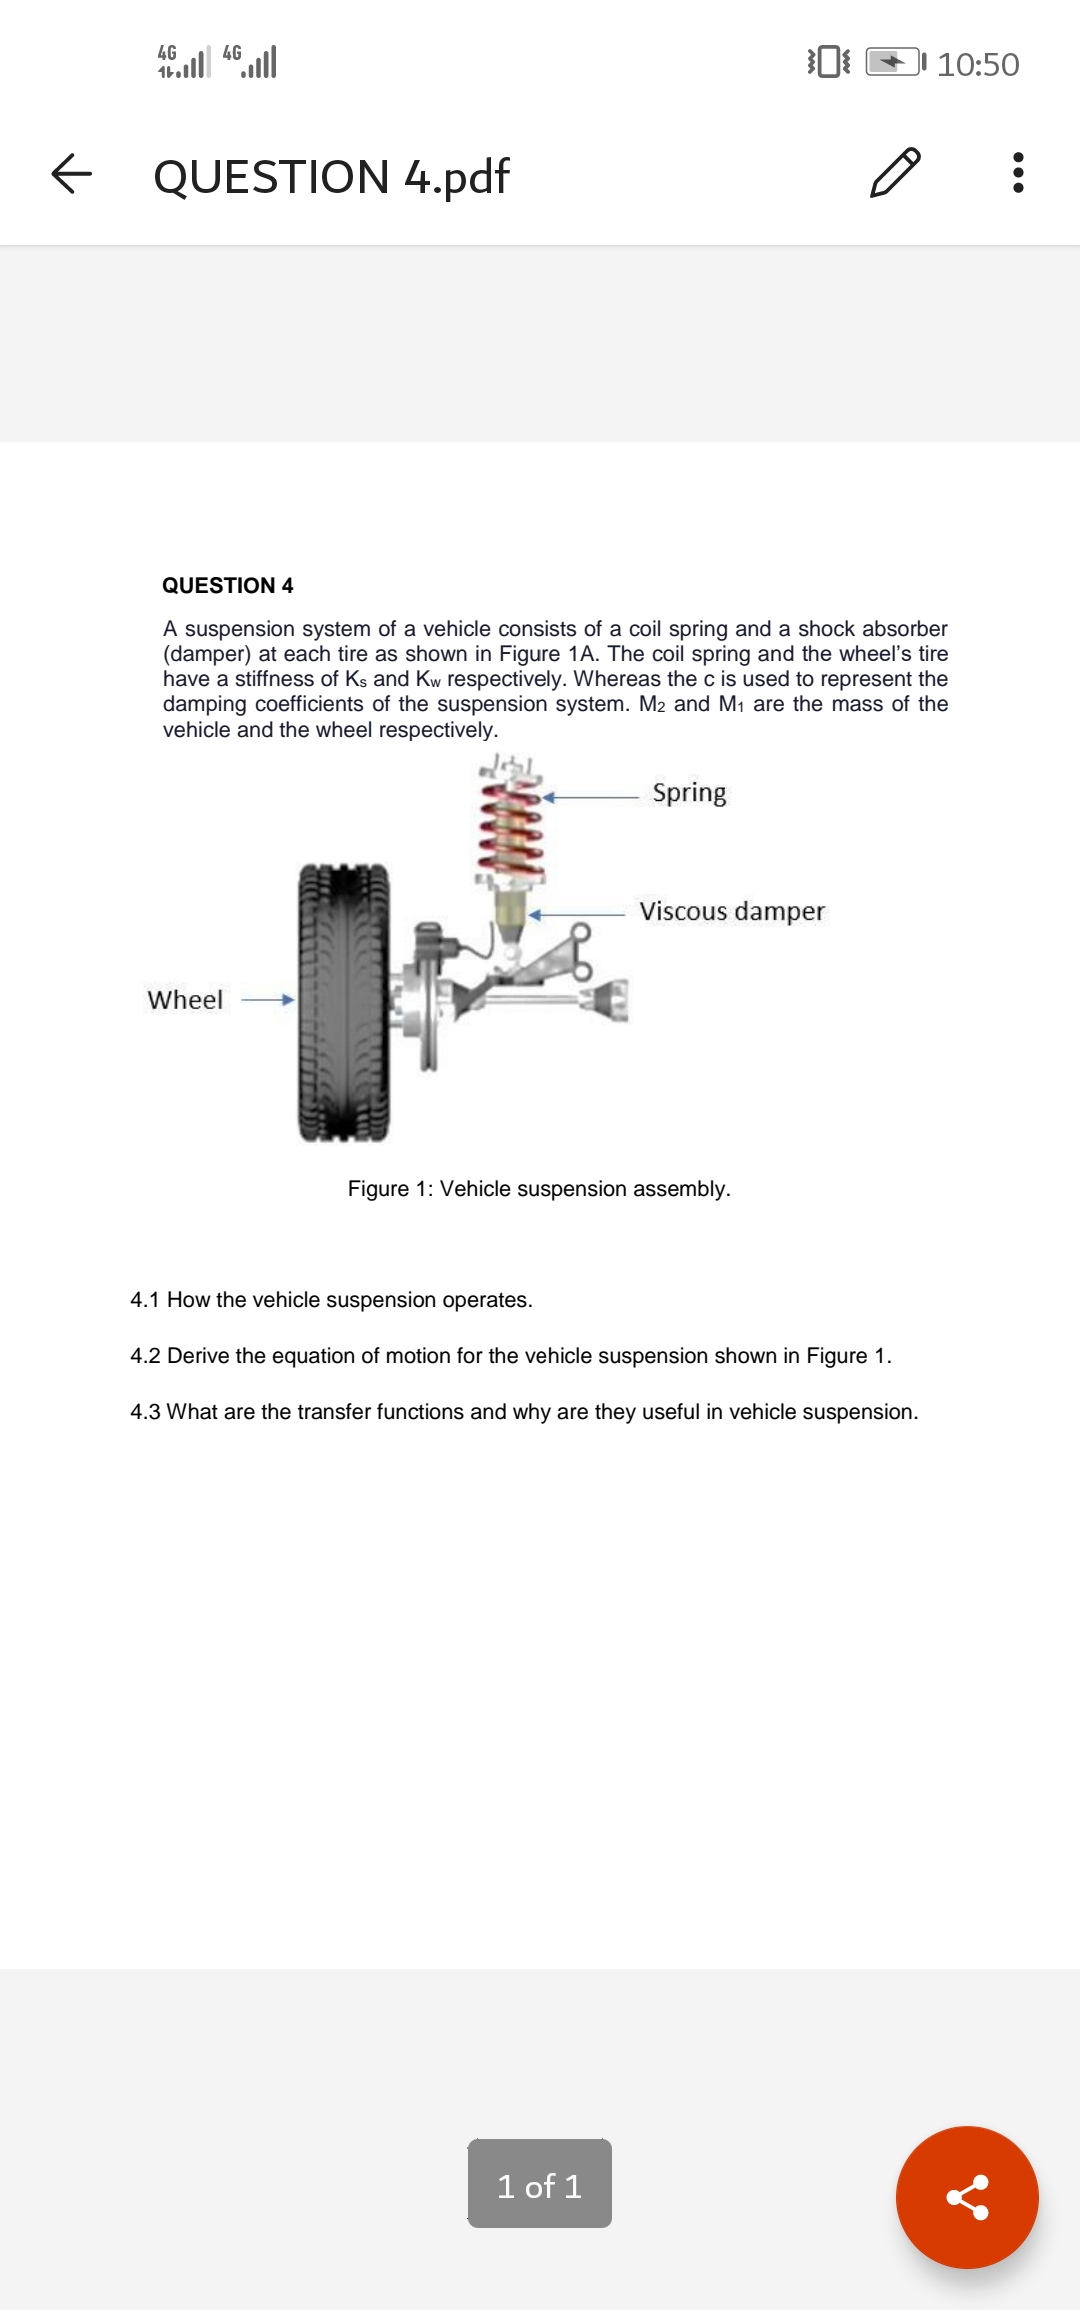 4G
4G
10:50
QUESTION 4.pdf
QUESTION 4
A suspension system of a vehicle consists of a coil spring and a shock absorber
(damper) at each tire as shown in Figure 1A. The coil spring and the wheel's tire
have a stiffness of Ks and Kw respectively. Whereas the c is used to represent the
damping coefficients of the suspension system. M2 and M1 are the mass of the
vehicle and the wheel respectively.
Spring
Viscous damper
Wheel
Figure 1: Vehicle suspension assembly.
4.1 How the vehicle suspension operates.
4.2 Derive the equation of motion for the vehicle suspension shown in Figure 1.
4.3 What are the transfer functions and why are they useful in vehicle suspension.
1 of 1
